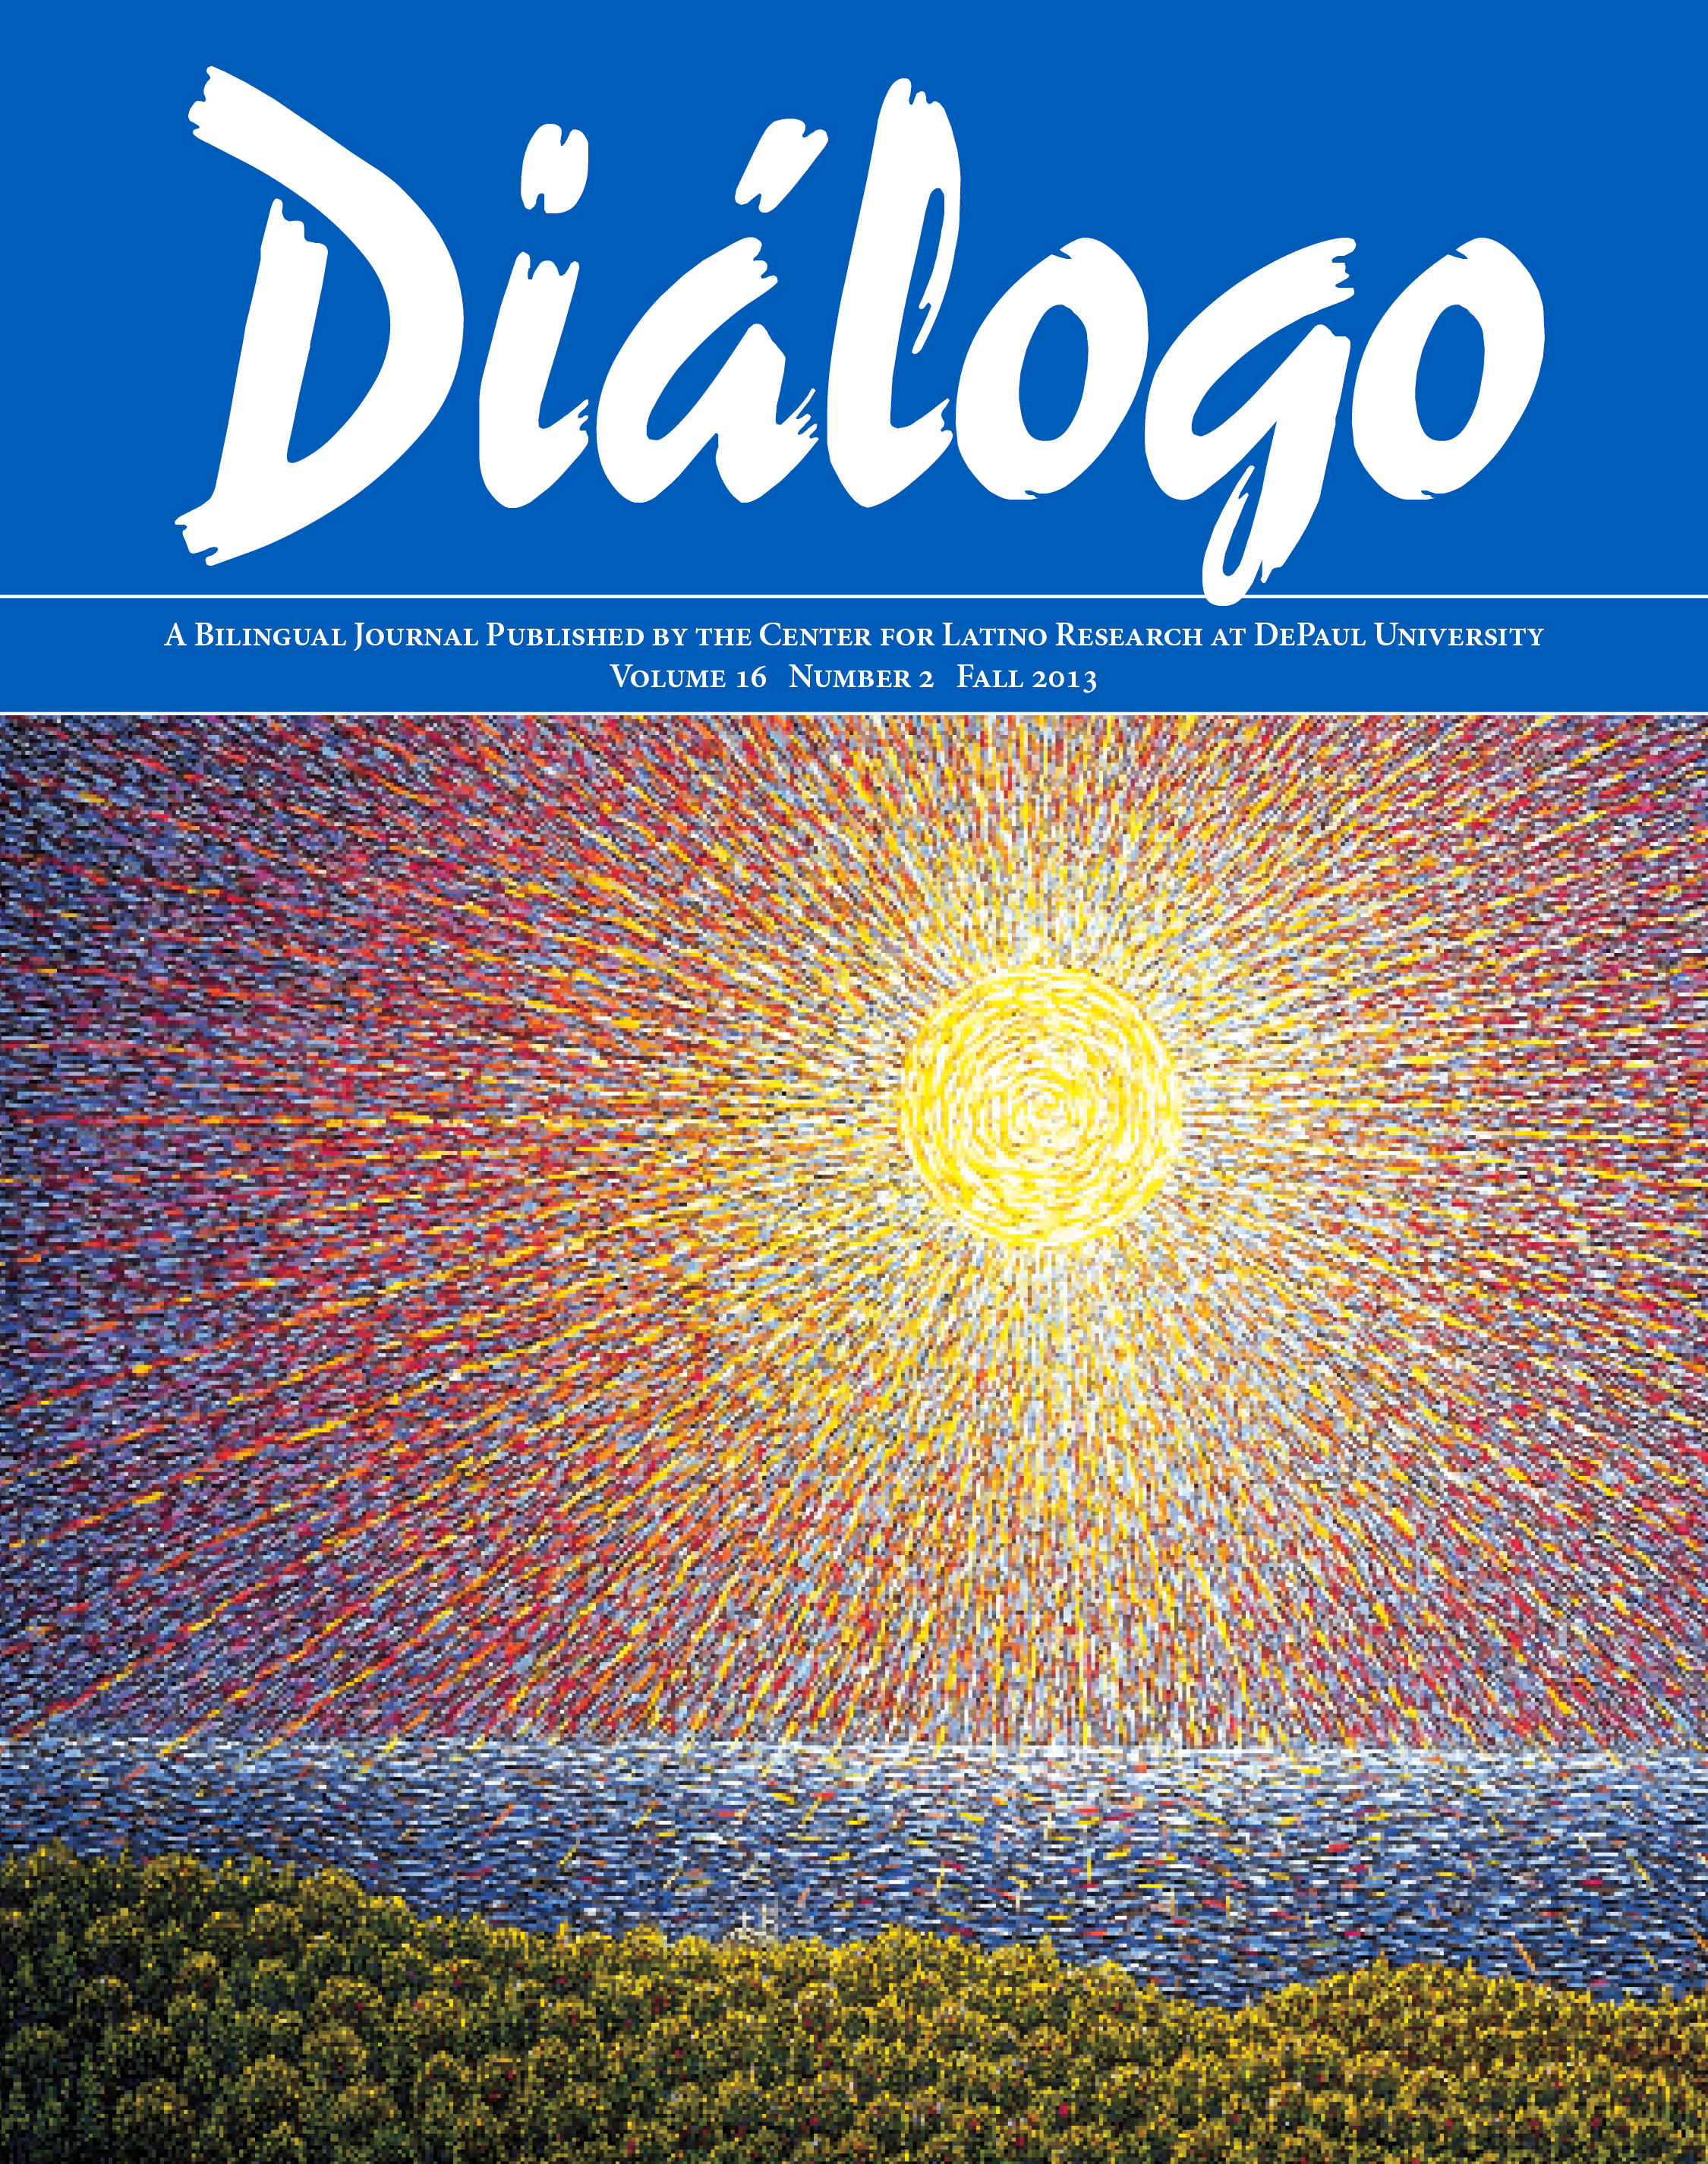 Cover of Diálogo's fall 2013 issue